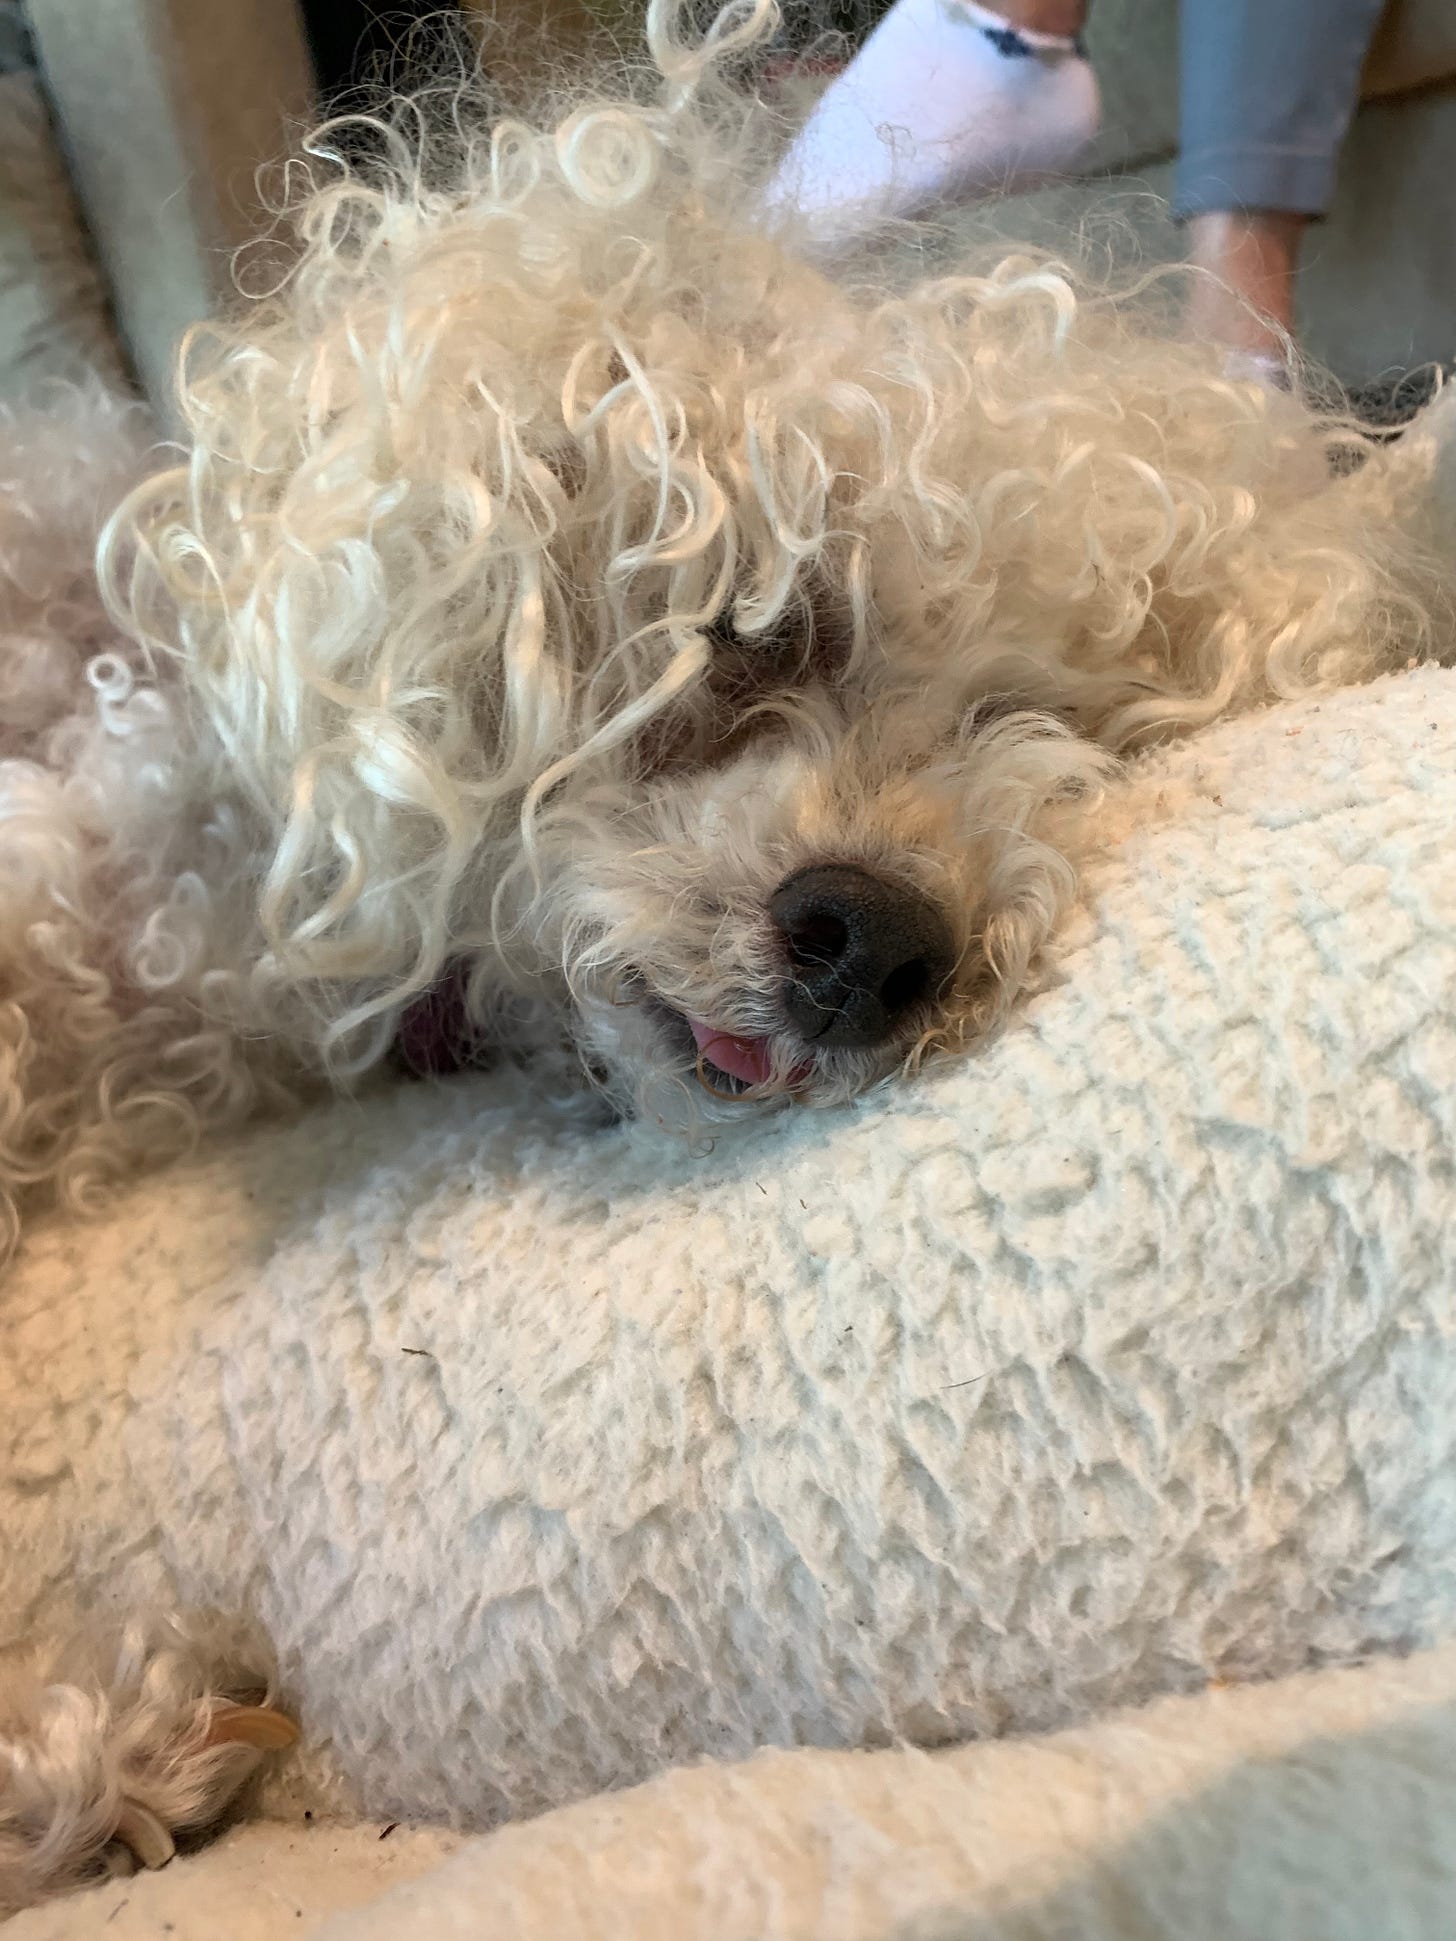 a small white dog with curly hair sleeps with her tongue out a little bit